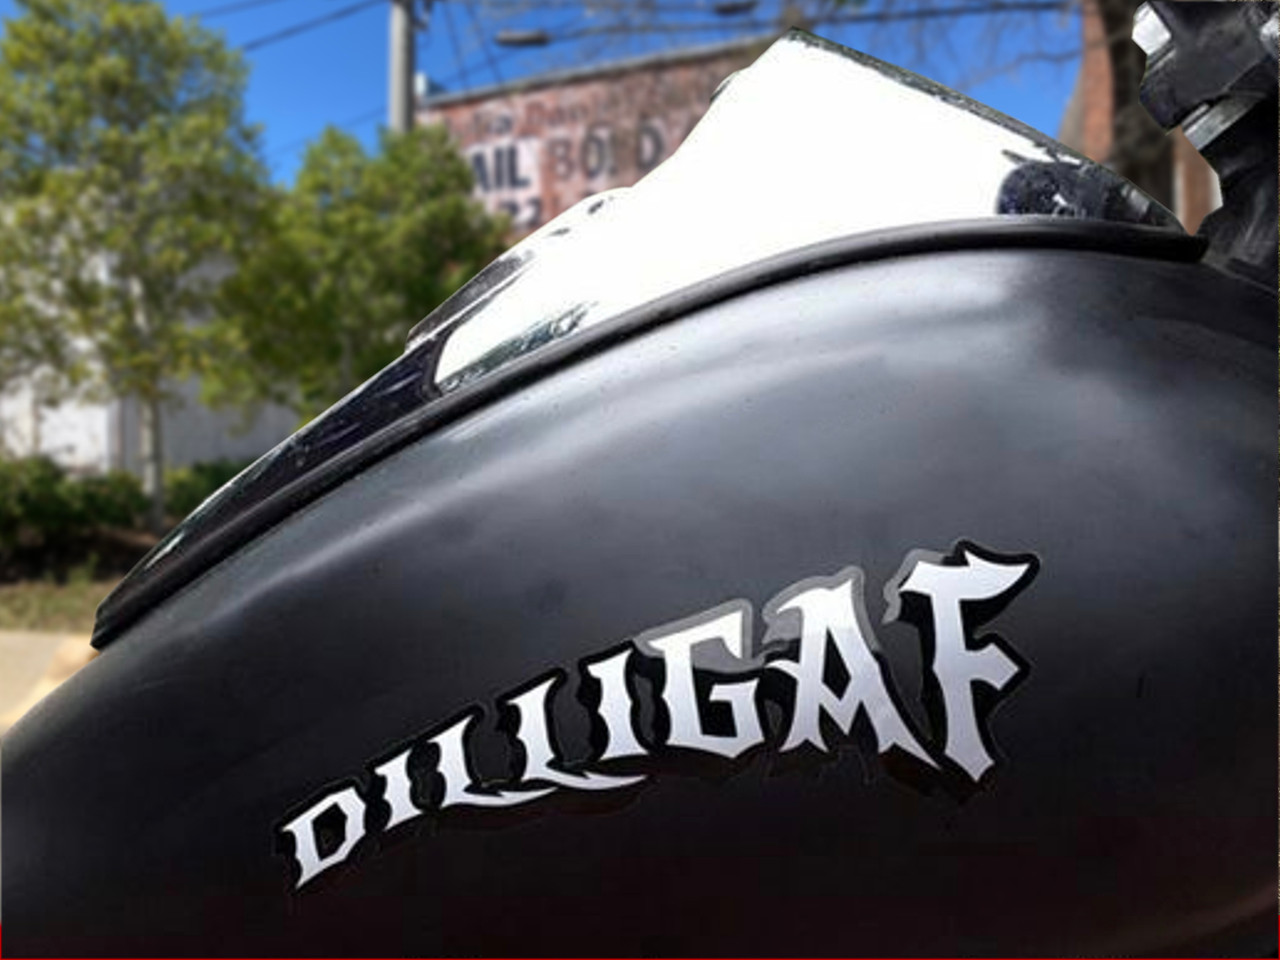 DILLIGAF Tank decals (MIRRORED 2 piece set)  pick from 4 colors